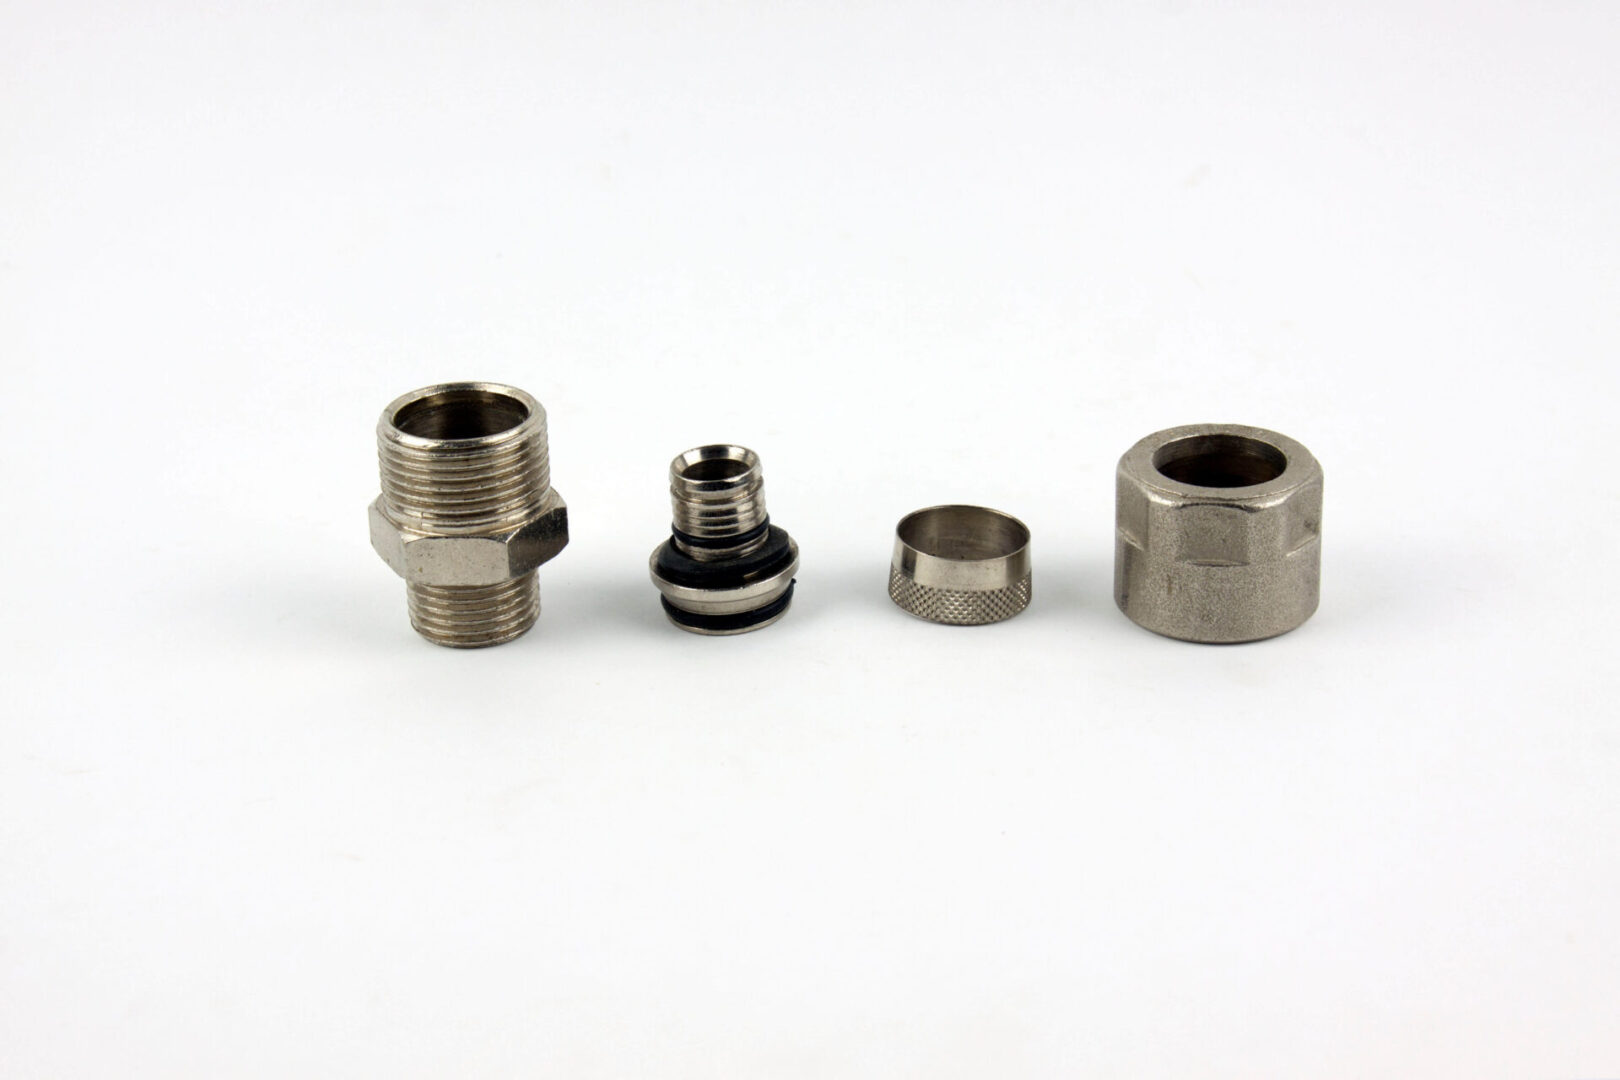 A set of stainless steel threaded fittings on a white background.